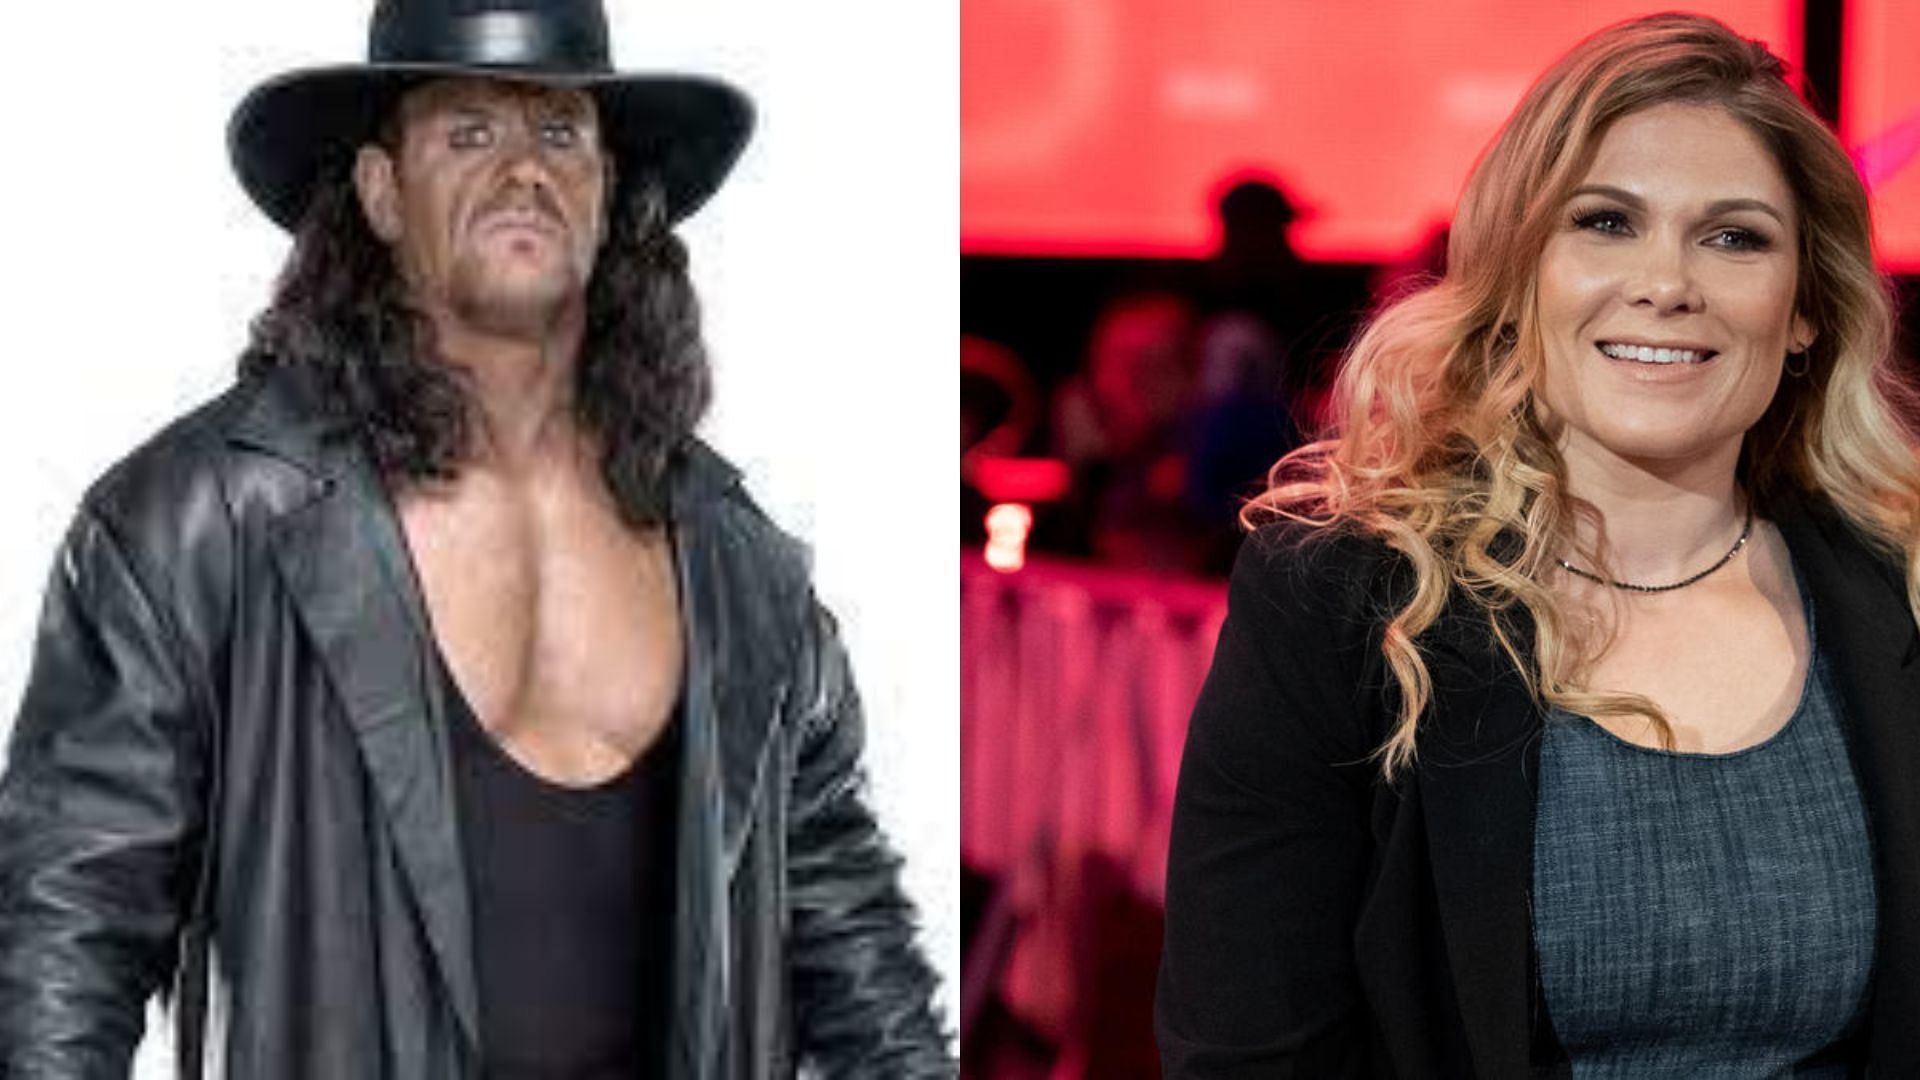 The star name Undertaker and Beth Phoenix as two legends who have been helpful